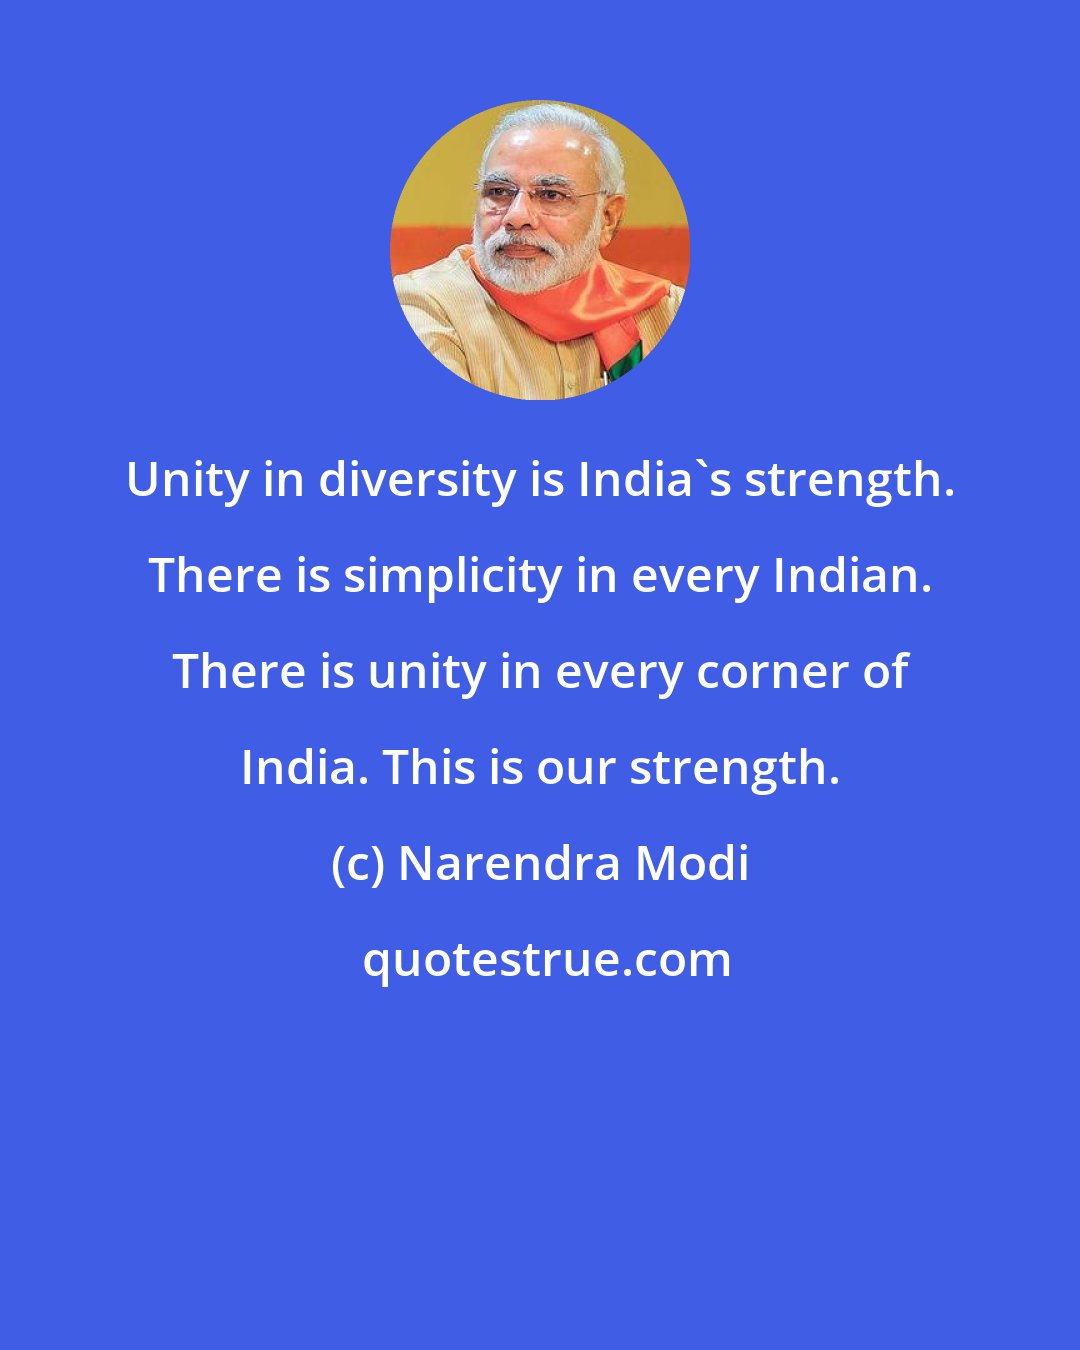 Narendra Modi: Unity in diversity is India's strength. There is simplicity in every Indian. There is unity in every corner of India. This is our strength.